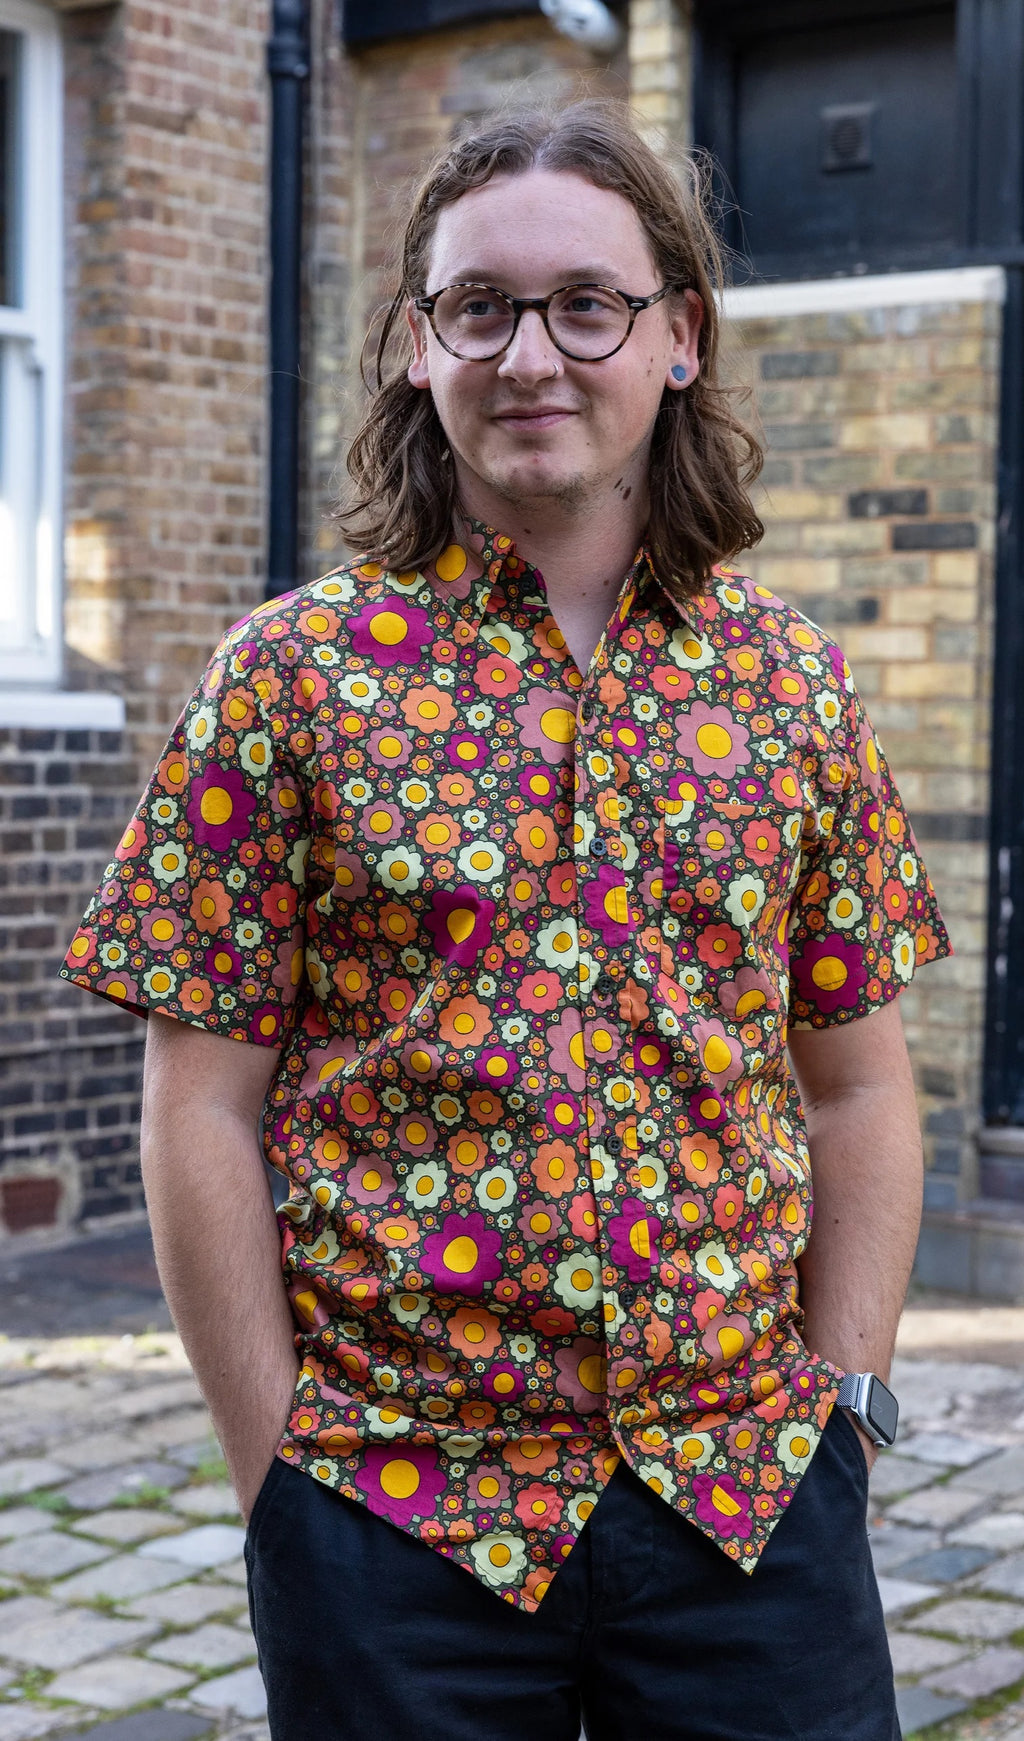 Groovy Retro Ditsy Floral Print Shirt by Run and Fly